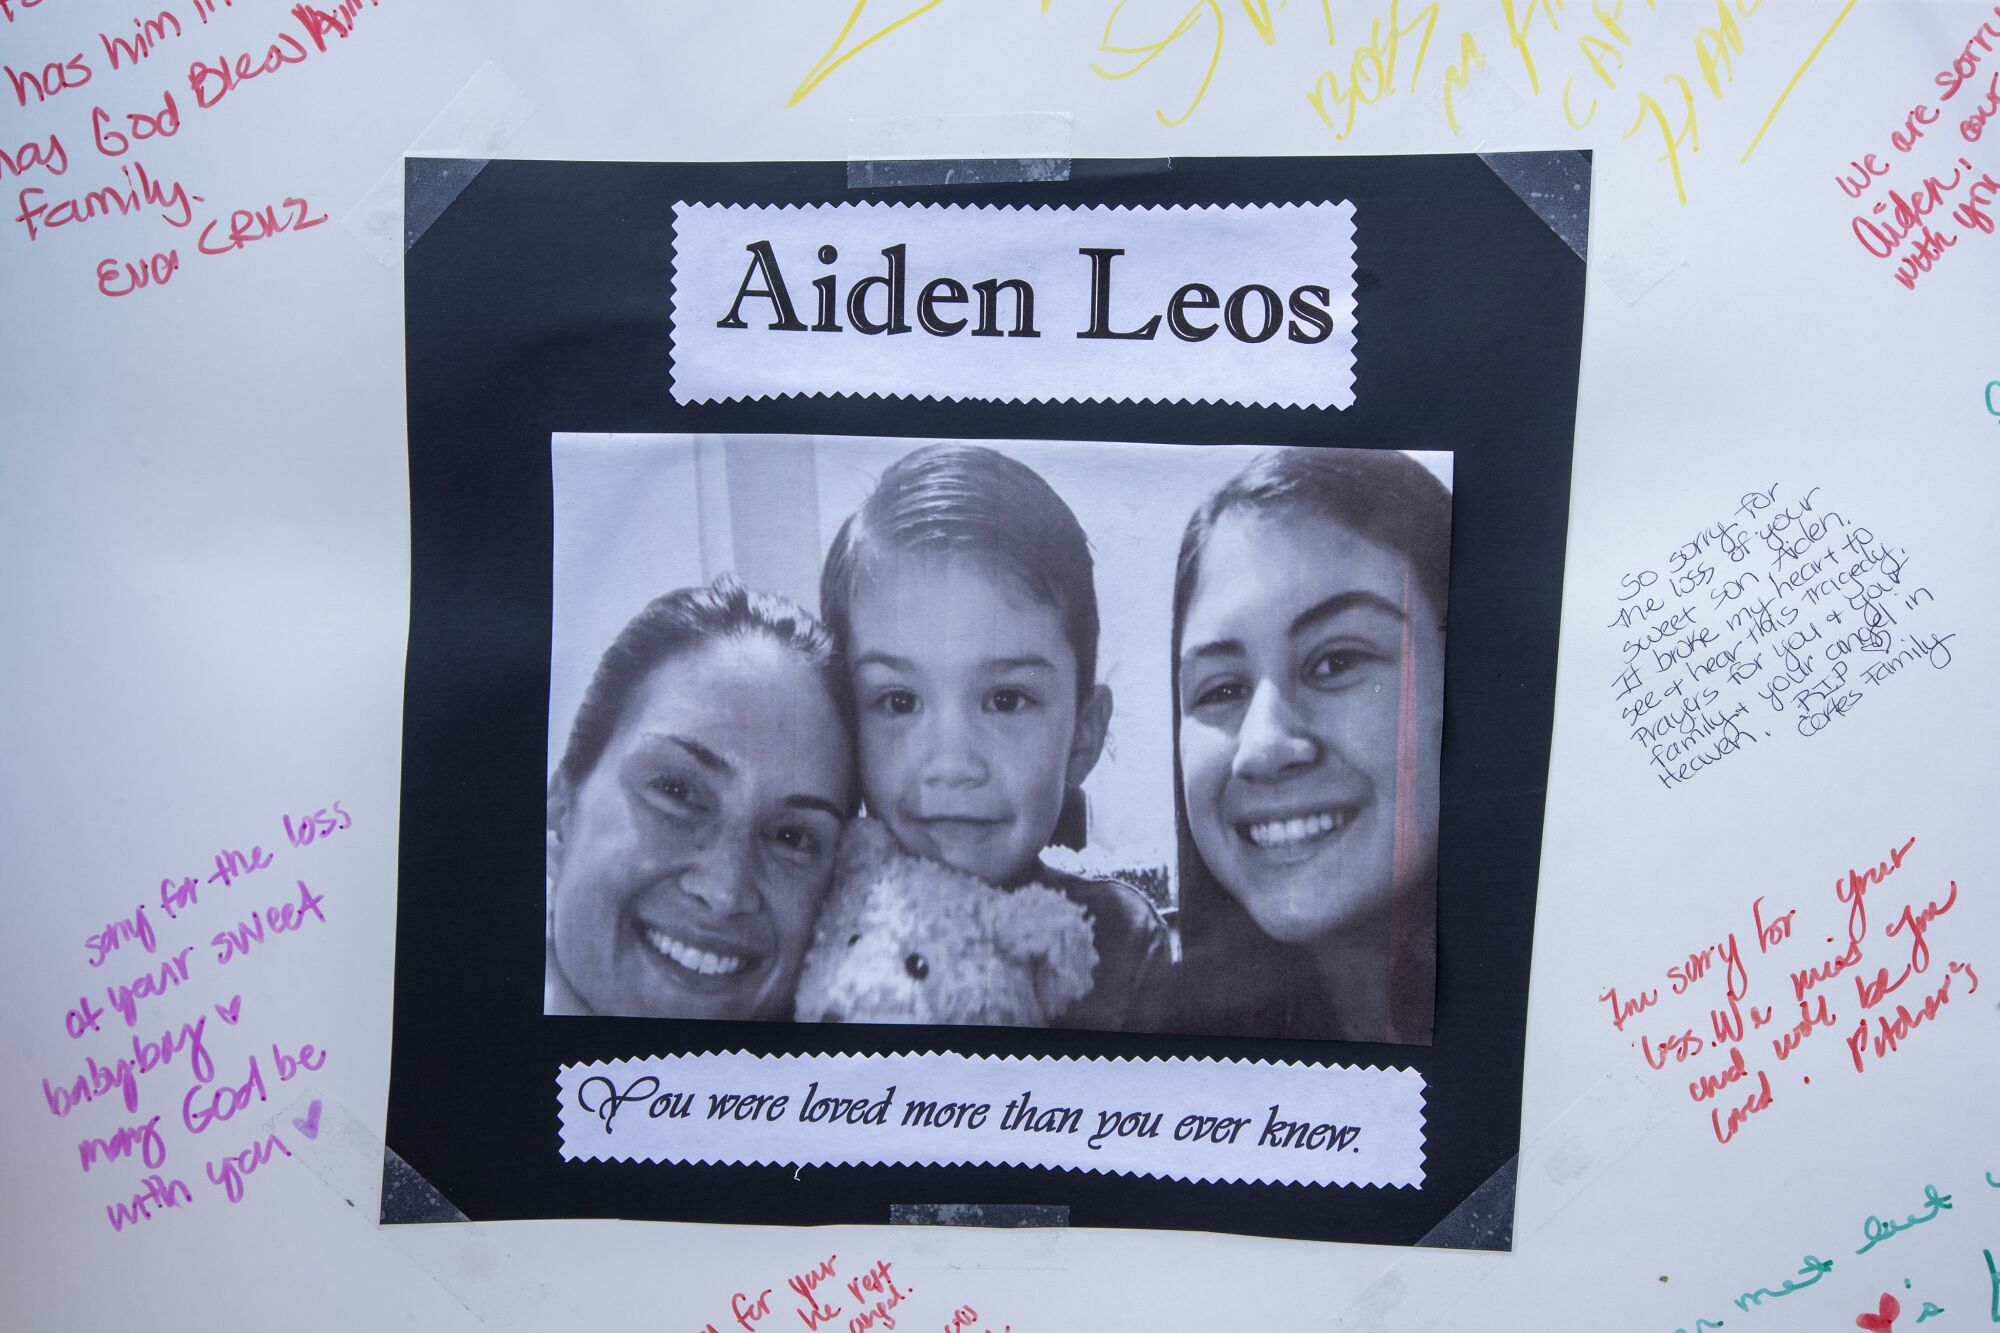 A poster with Aiden Leos' image hangs at a memorial for the 6-year-old on a 55 Freeway overpass in Orange.